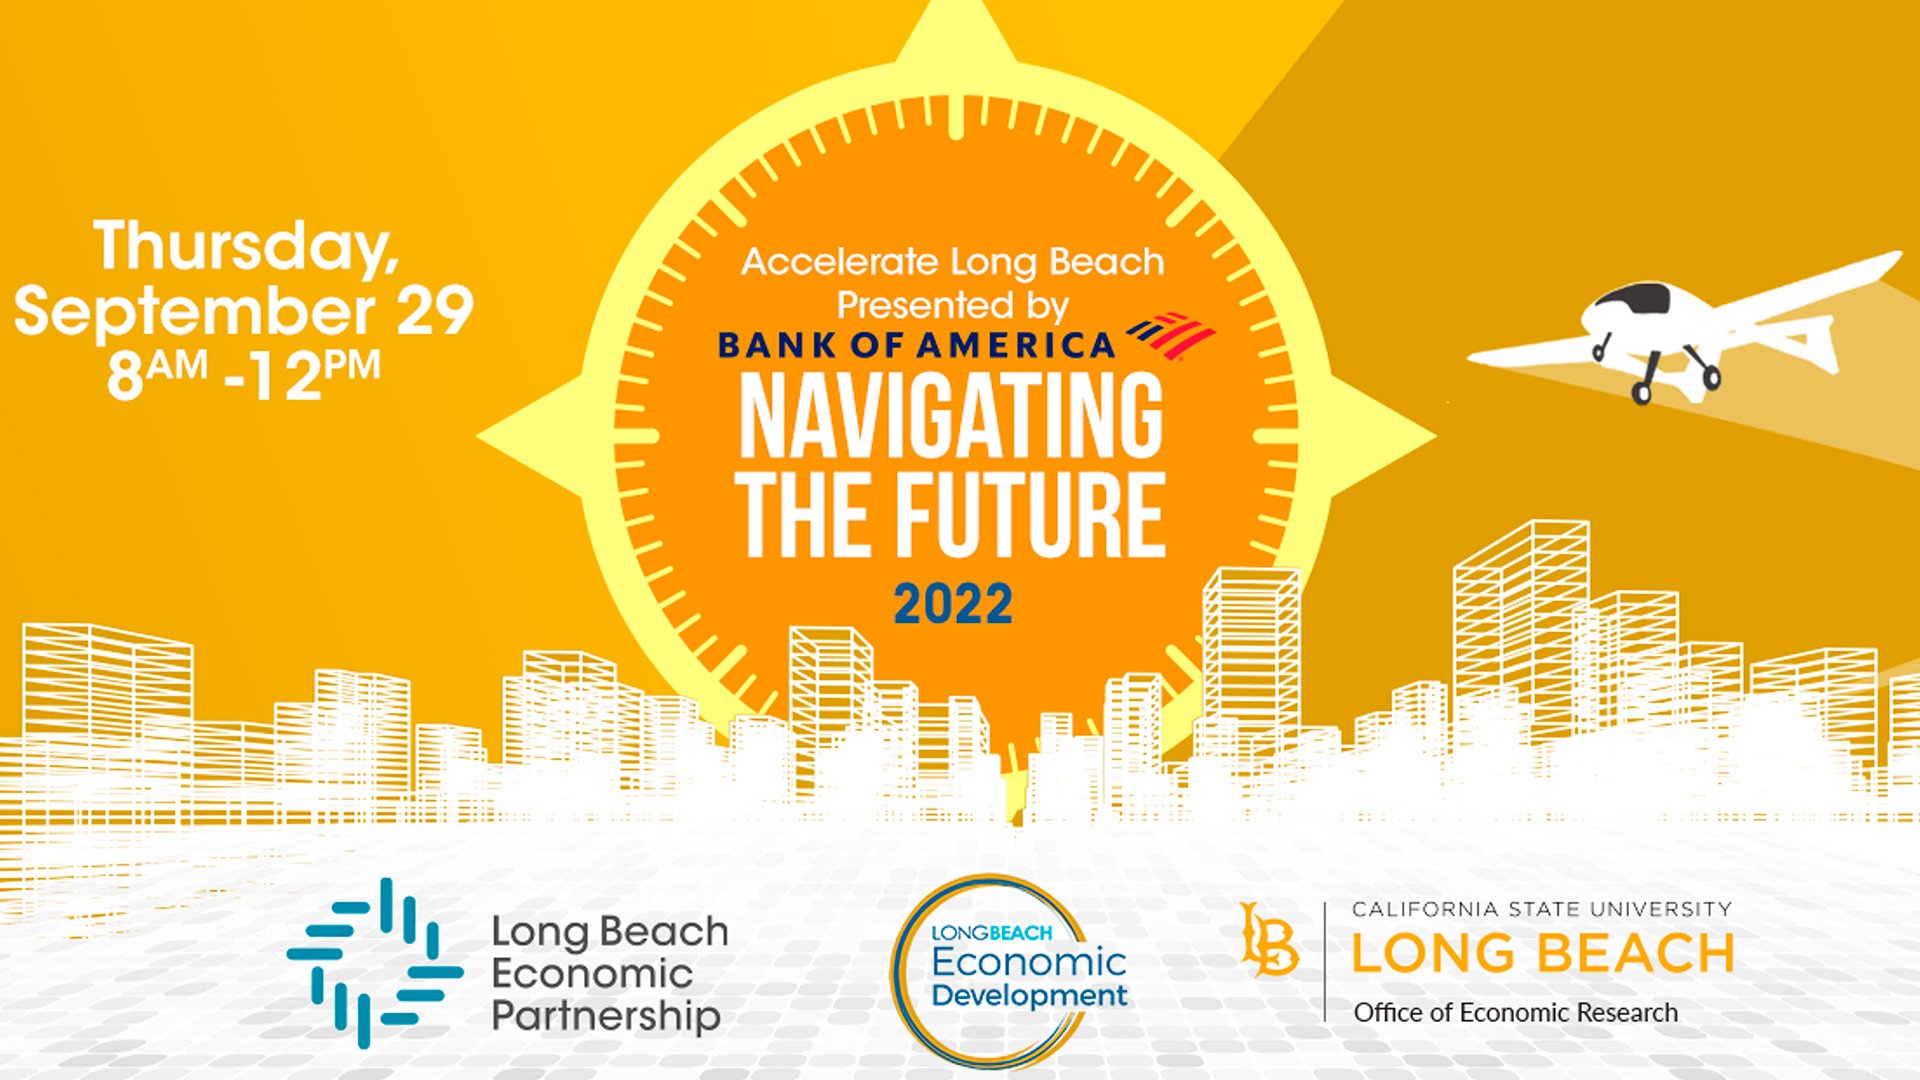 Accelerate Long Beach returns in person next week with a focus on the future